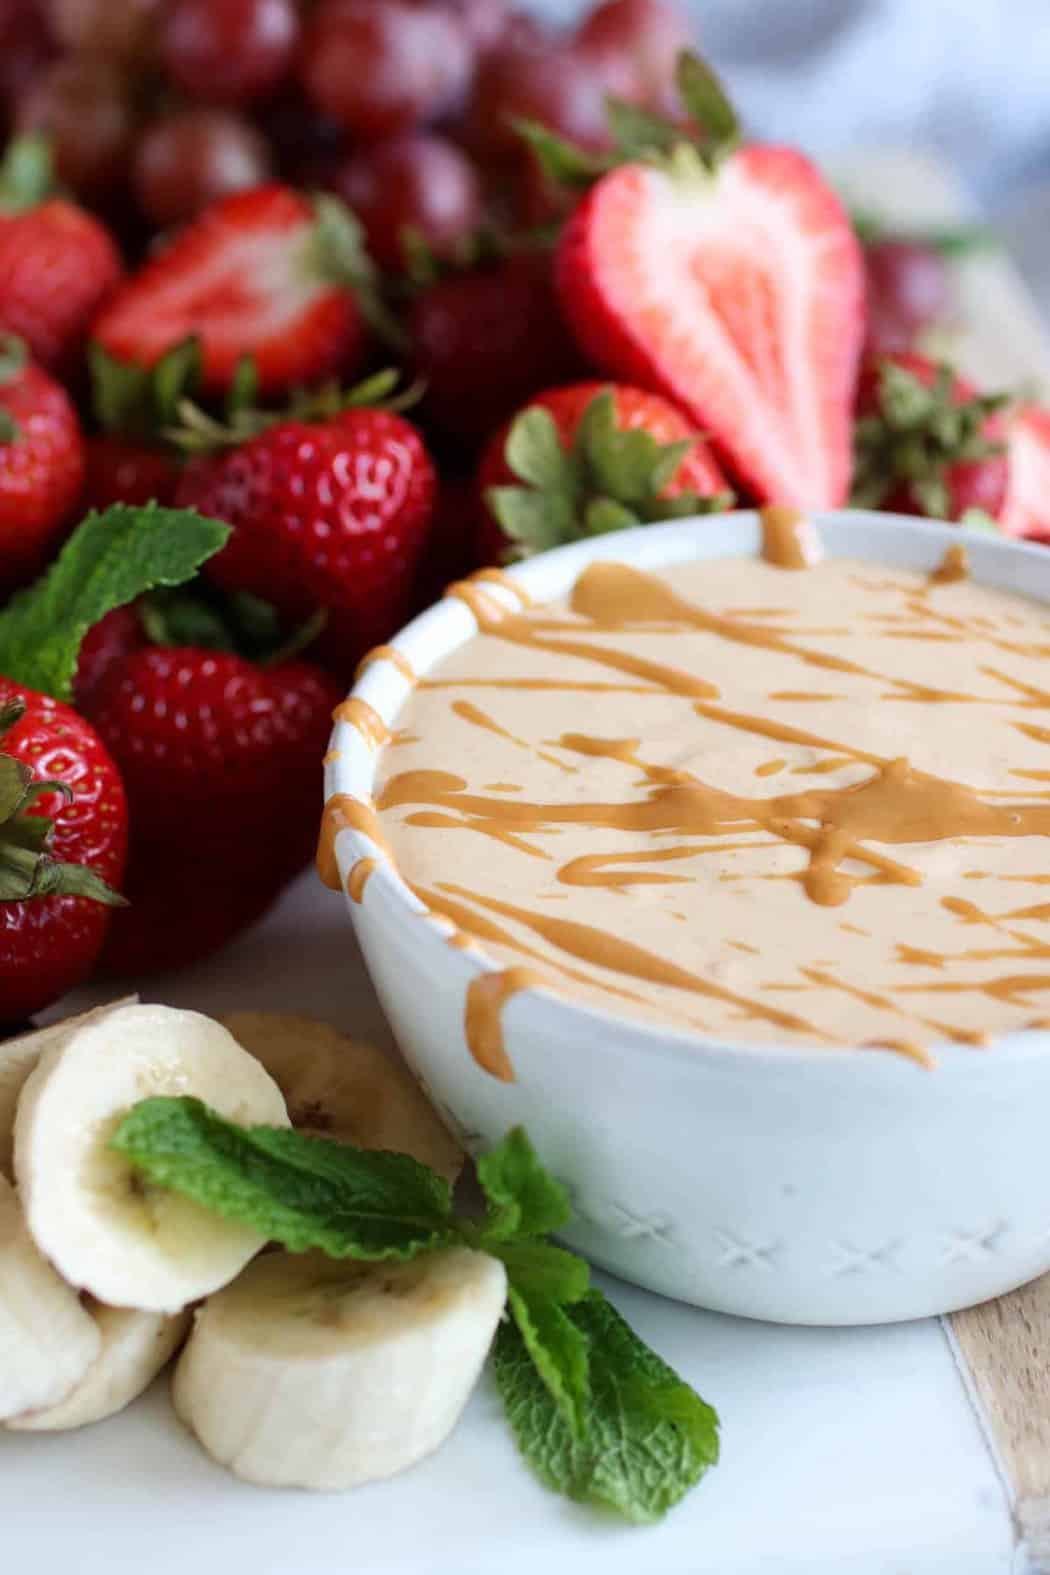 Easy Peanut Butter Yogurt Fruit Dip in a white bowl next to strawberries and banana slices